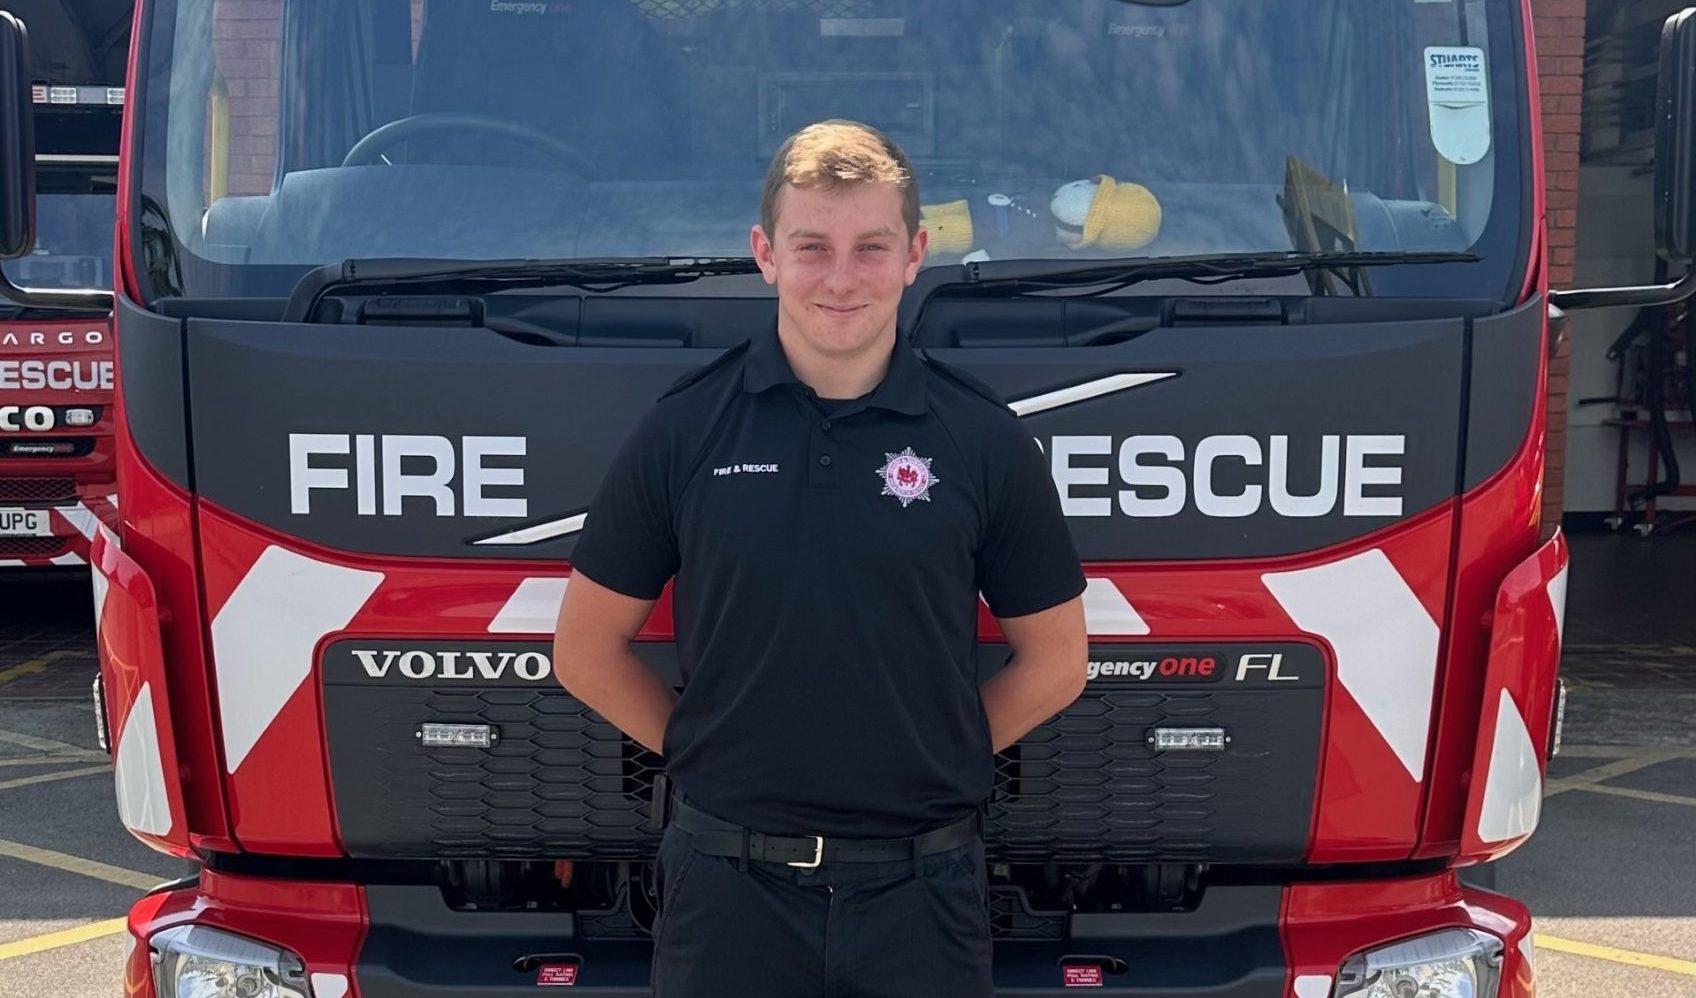 Third generation on-call firefighter joins our charity